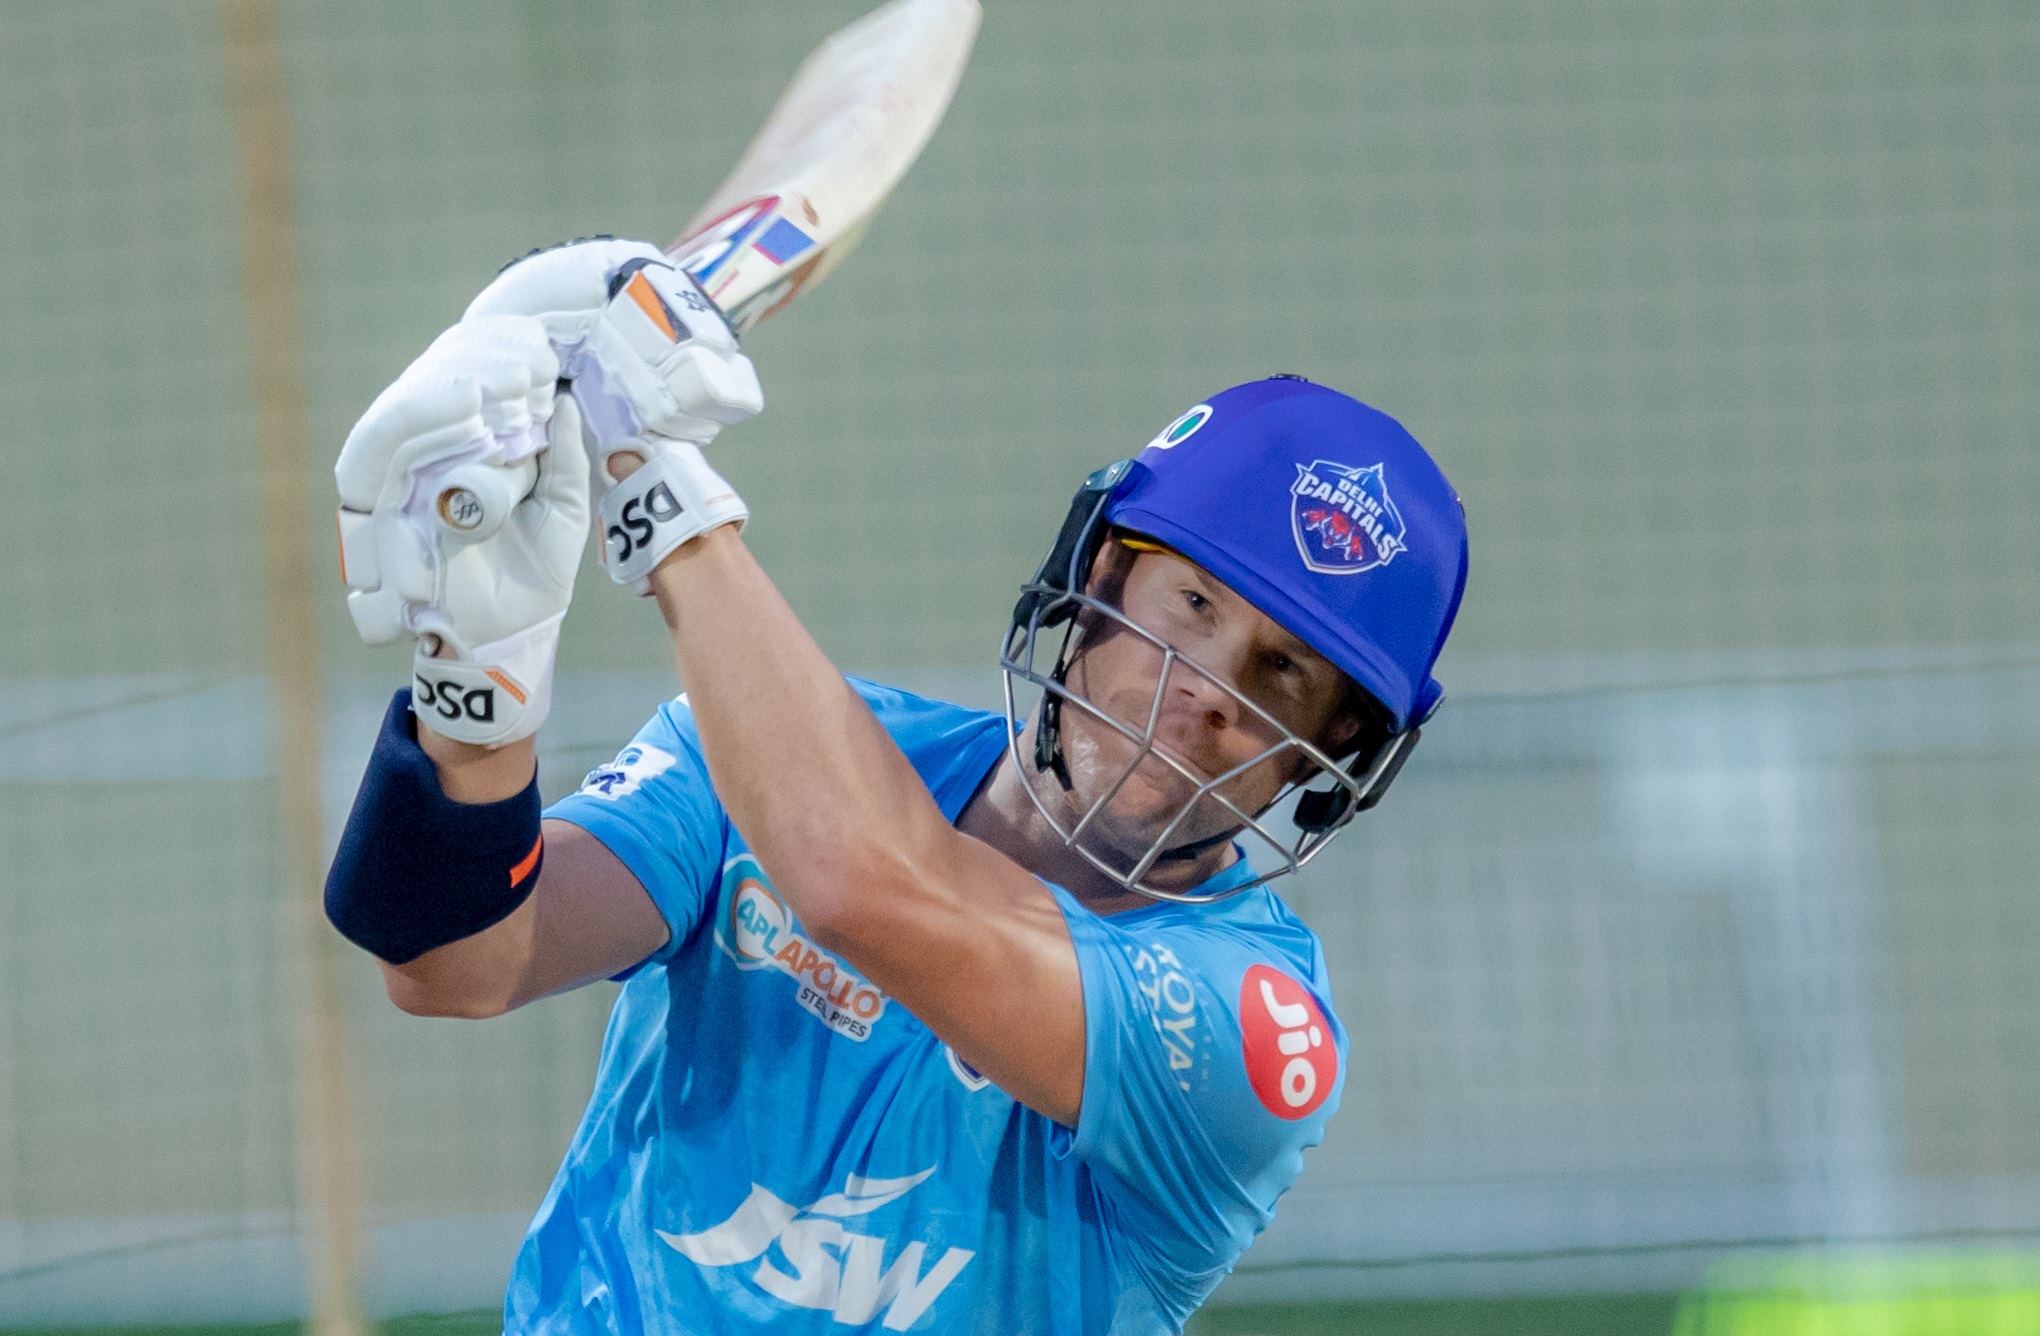 "Quite a congested points table, but exciting for the rest of the tournament," says Delhi Capitals' opener David Warner